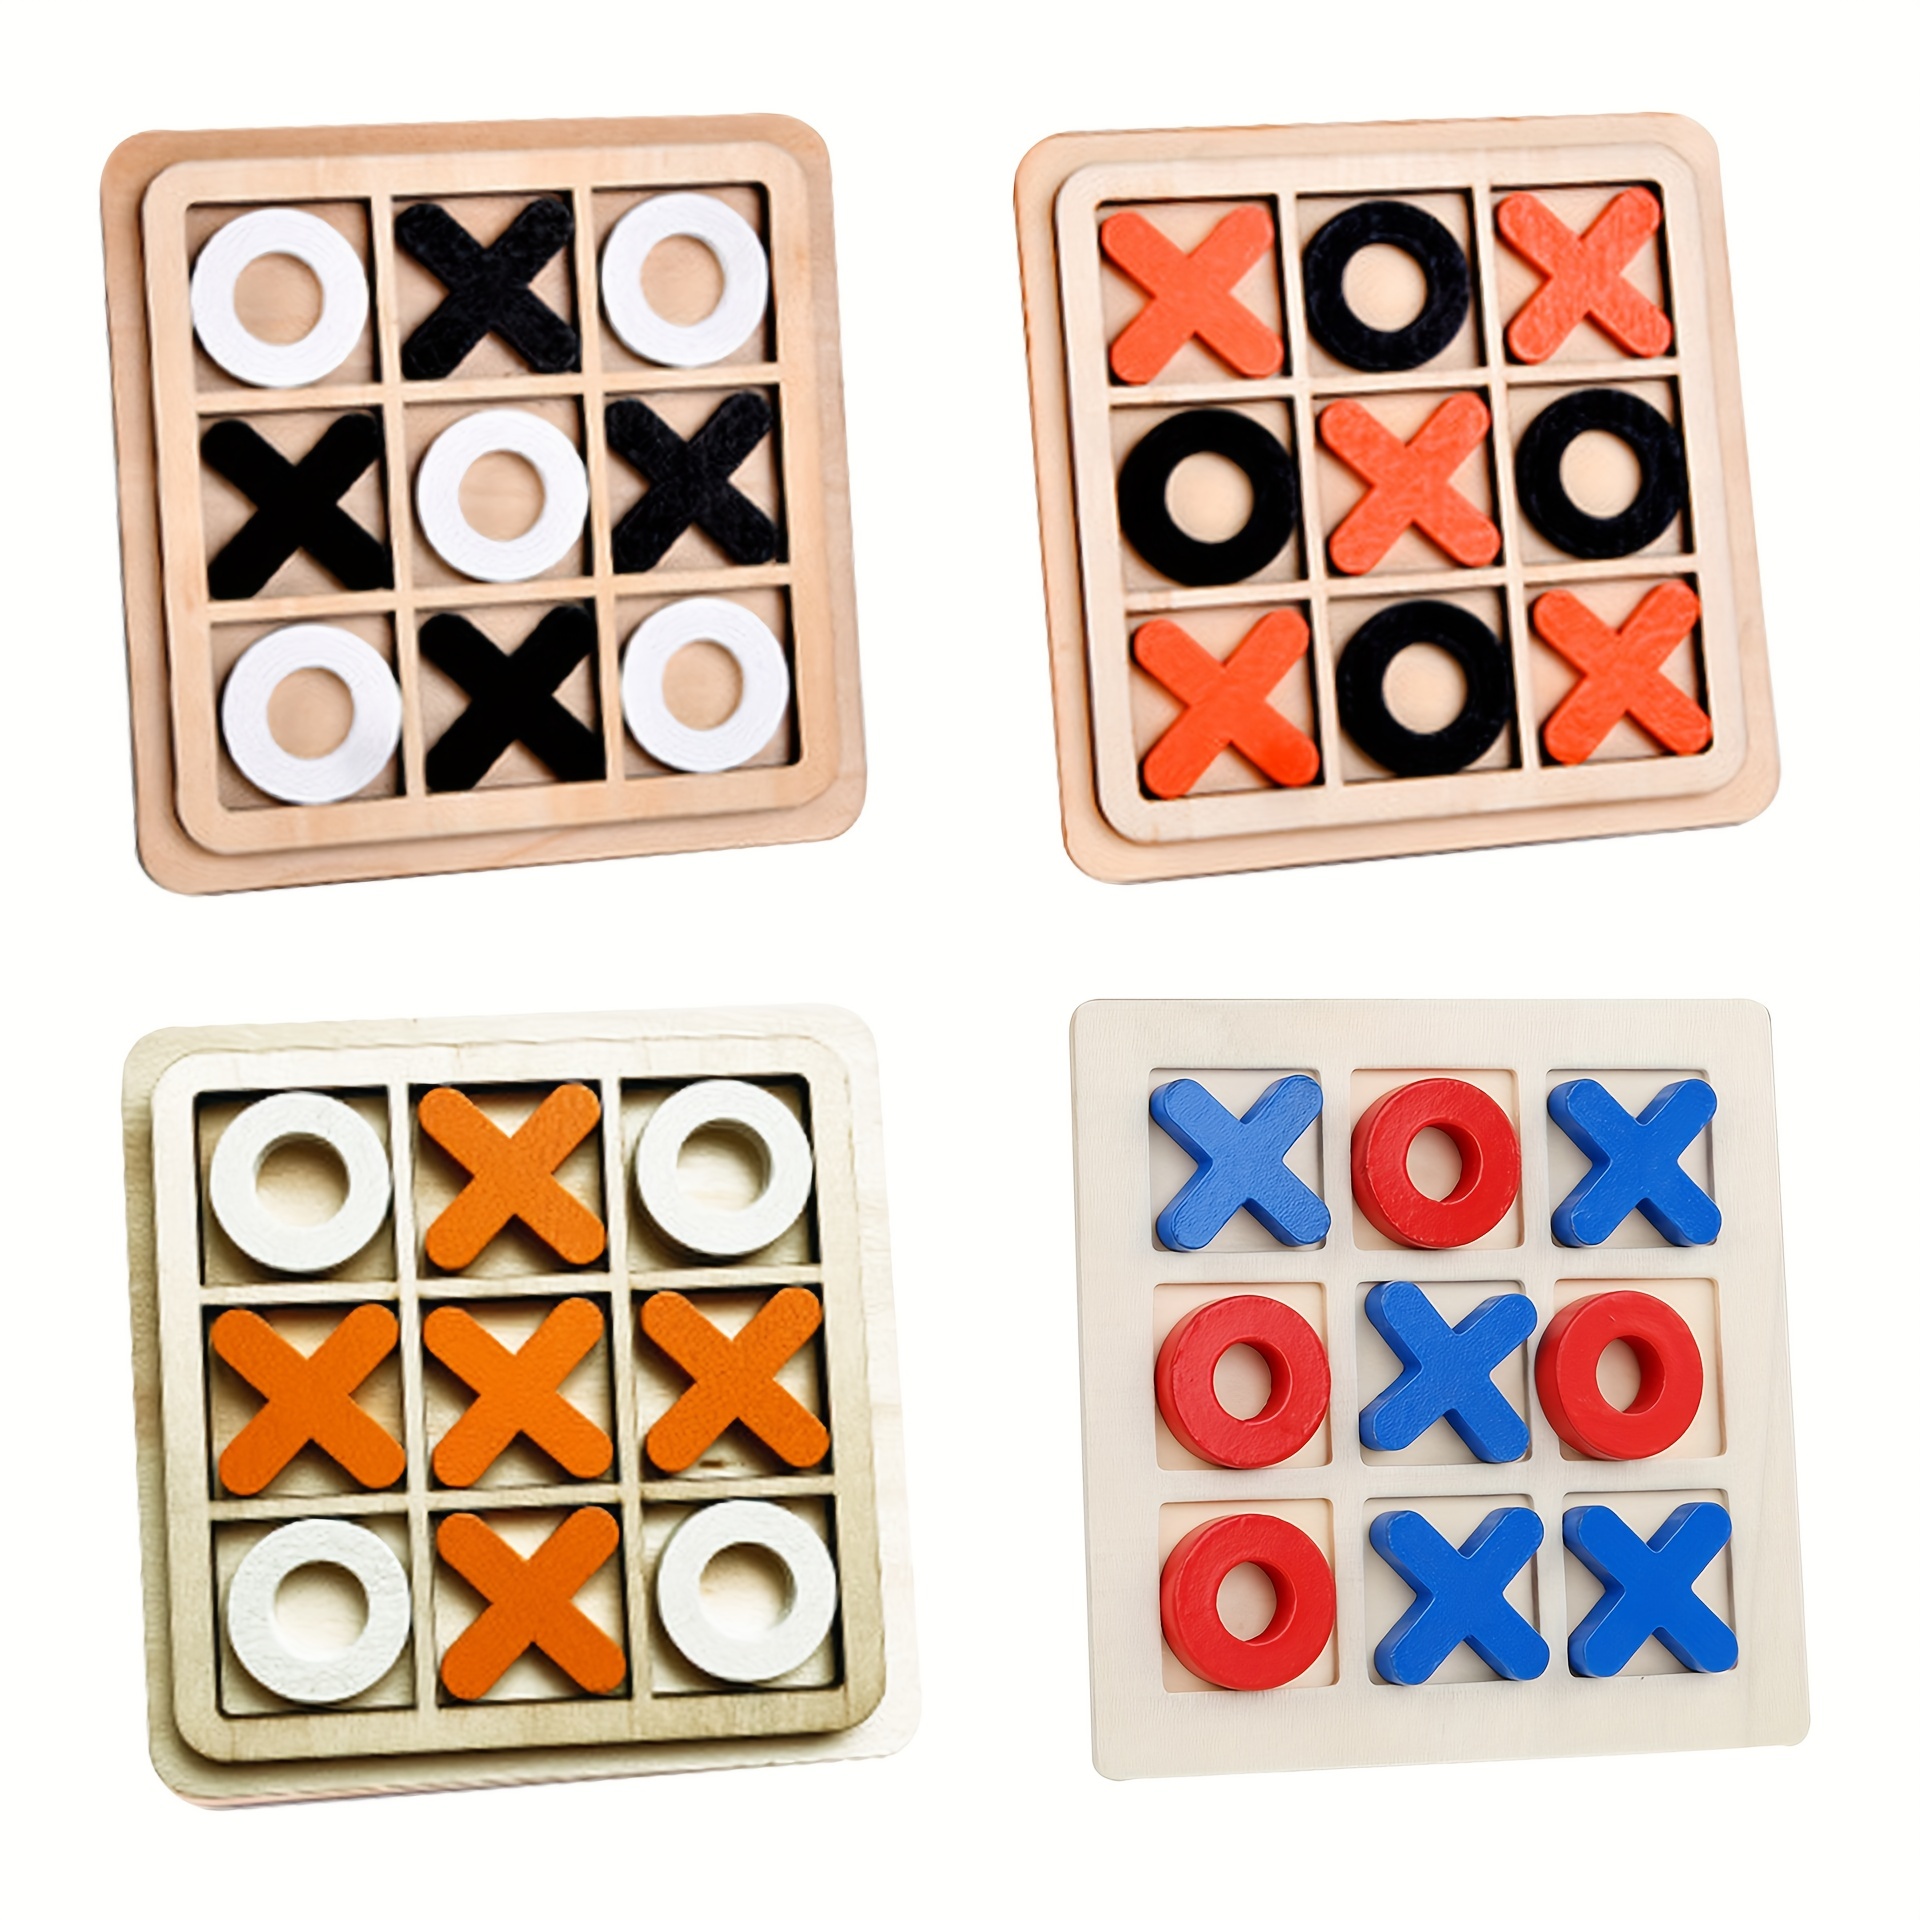 Perfect Life Ideas Wooden Tic Tac Toe Game and Wood Peg Game 2 Pcs Set - Family Board Game Adults Kids Travel Games Skill Occupational Therapy T